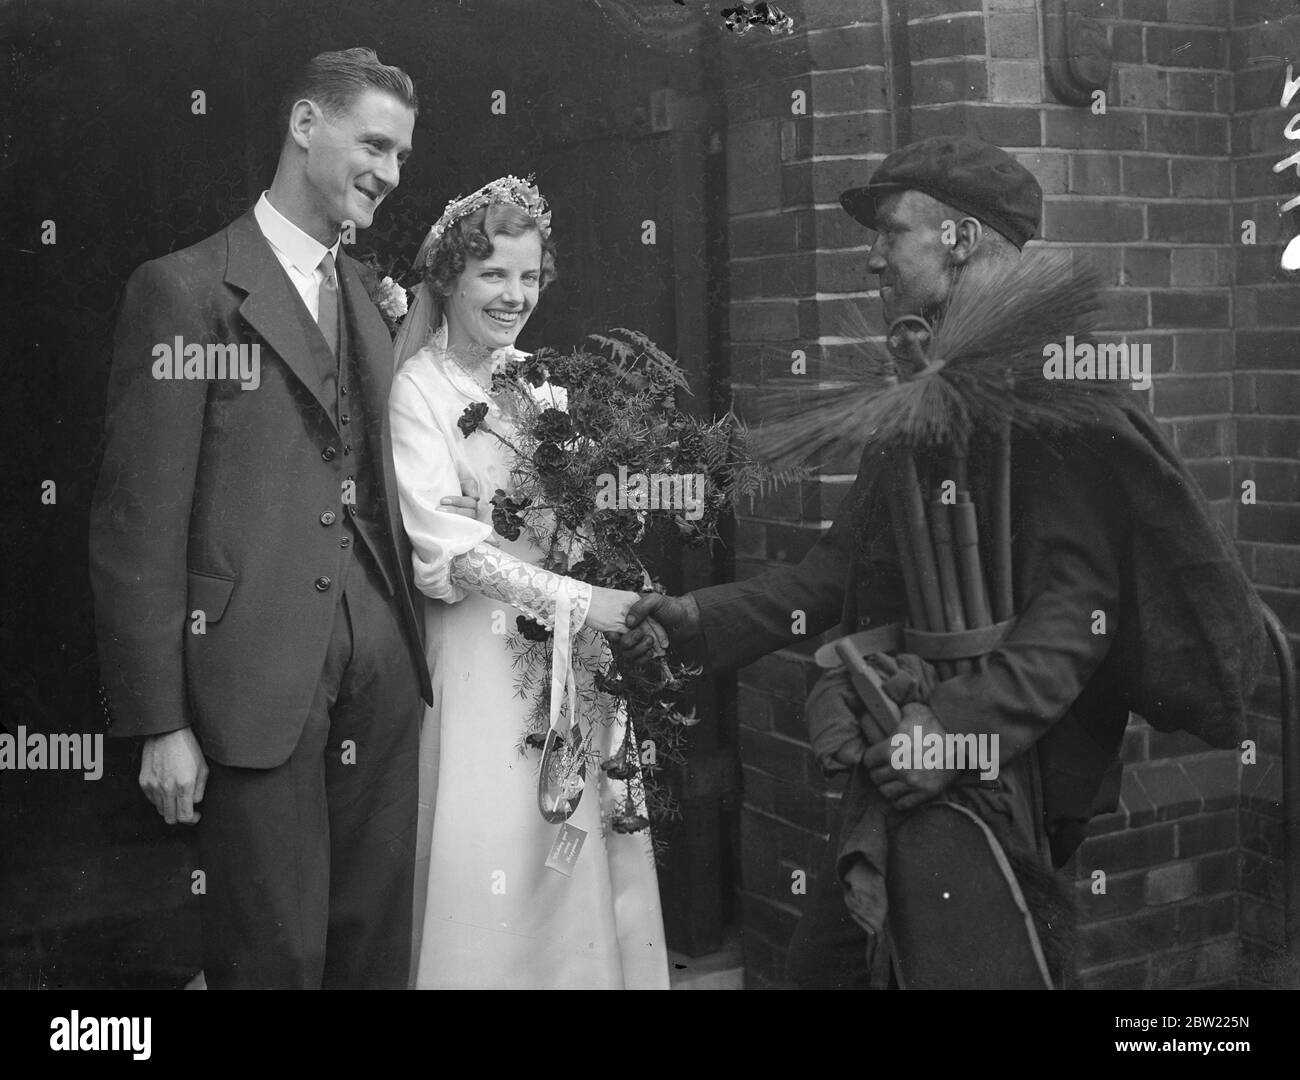 The local sweep, Mr Breezer, attended the wedding and wished good luck to the bride and groom when Miss Ivy Worden and Mr Leslie Wall free were married at St Thomas's Church, St Thomas Road Highbury. 2 October 1937. Stock Photo